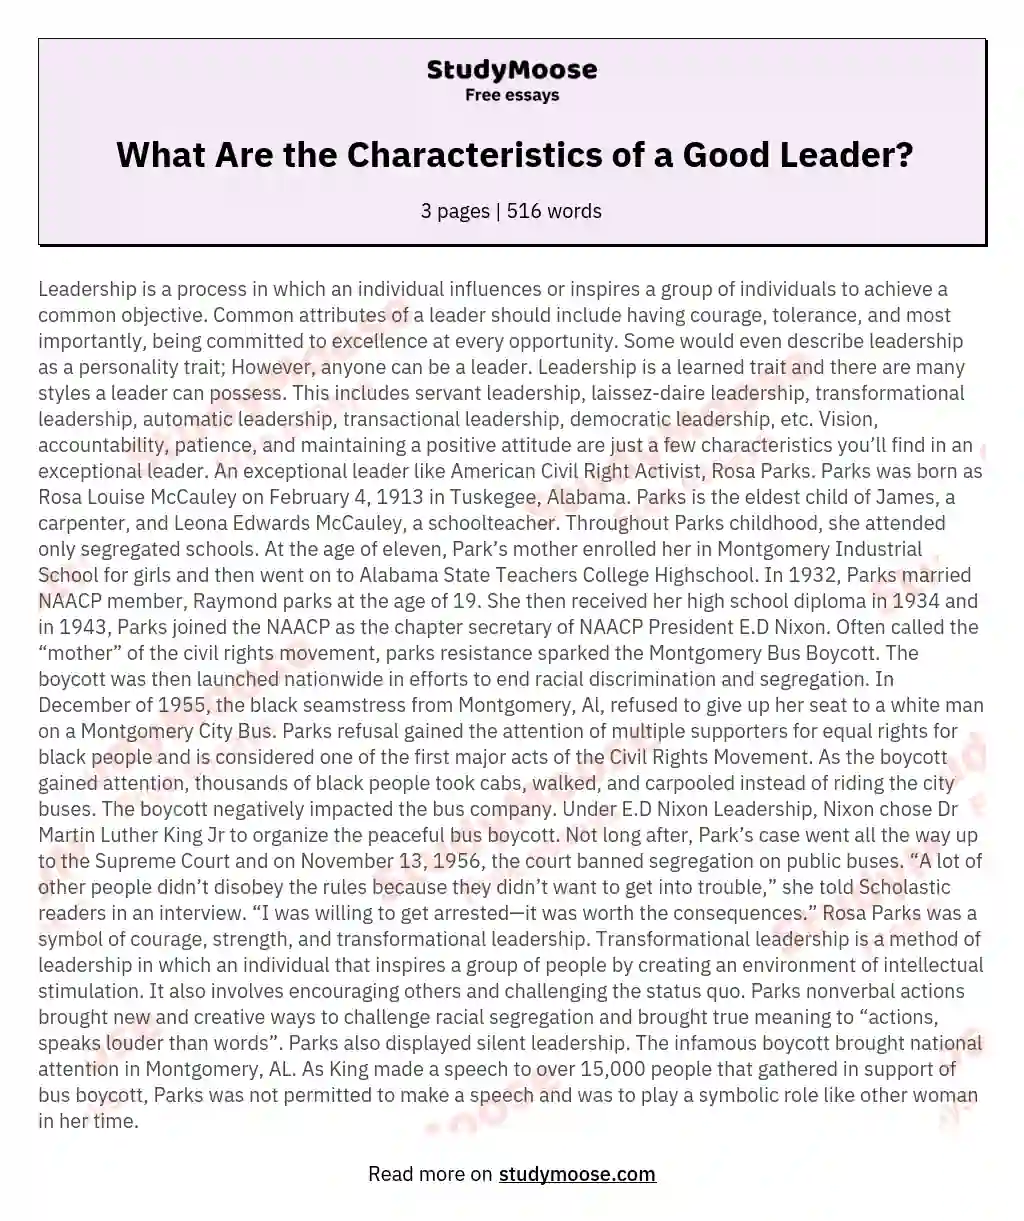 What Are the Characteristics of a Good Leader? essay